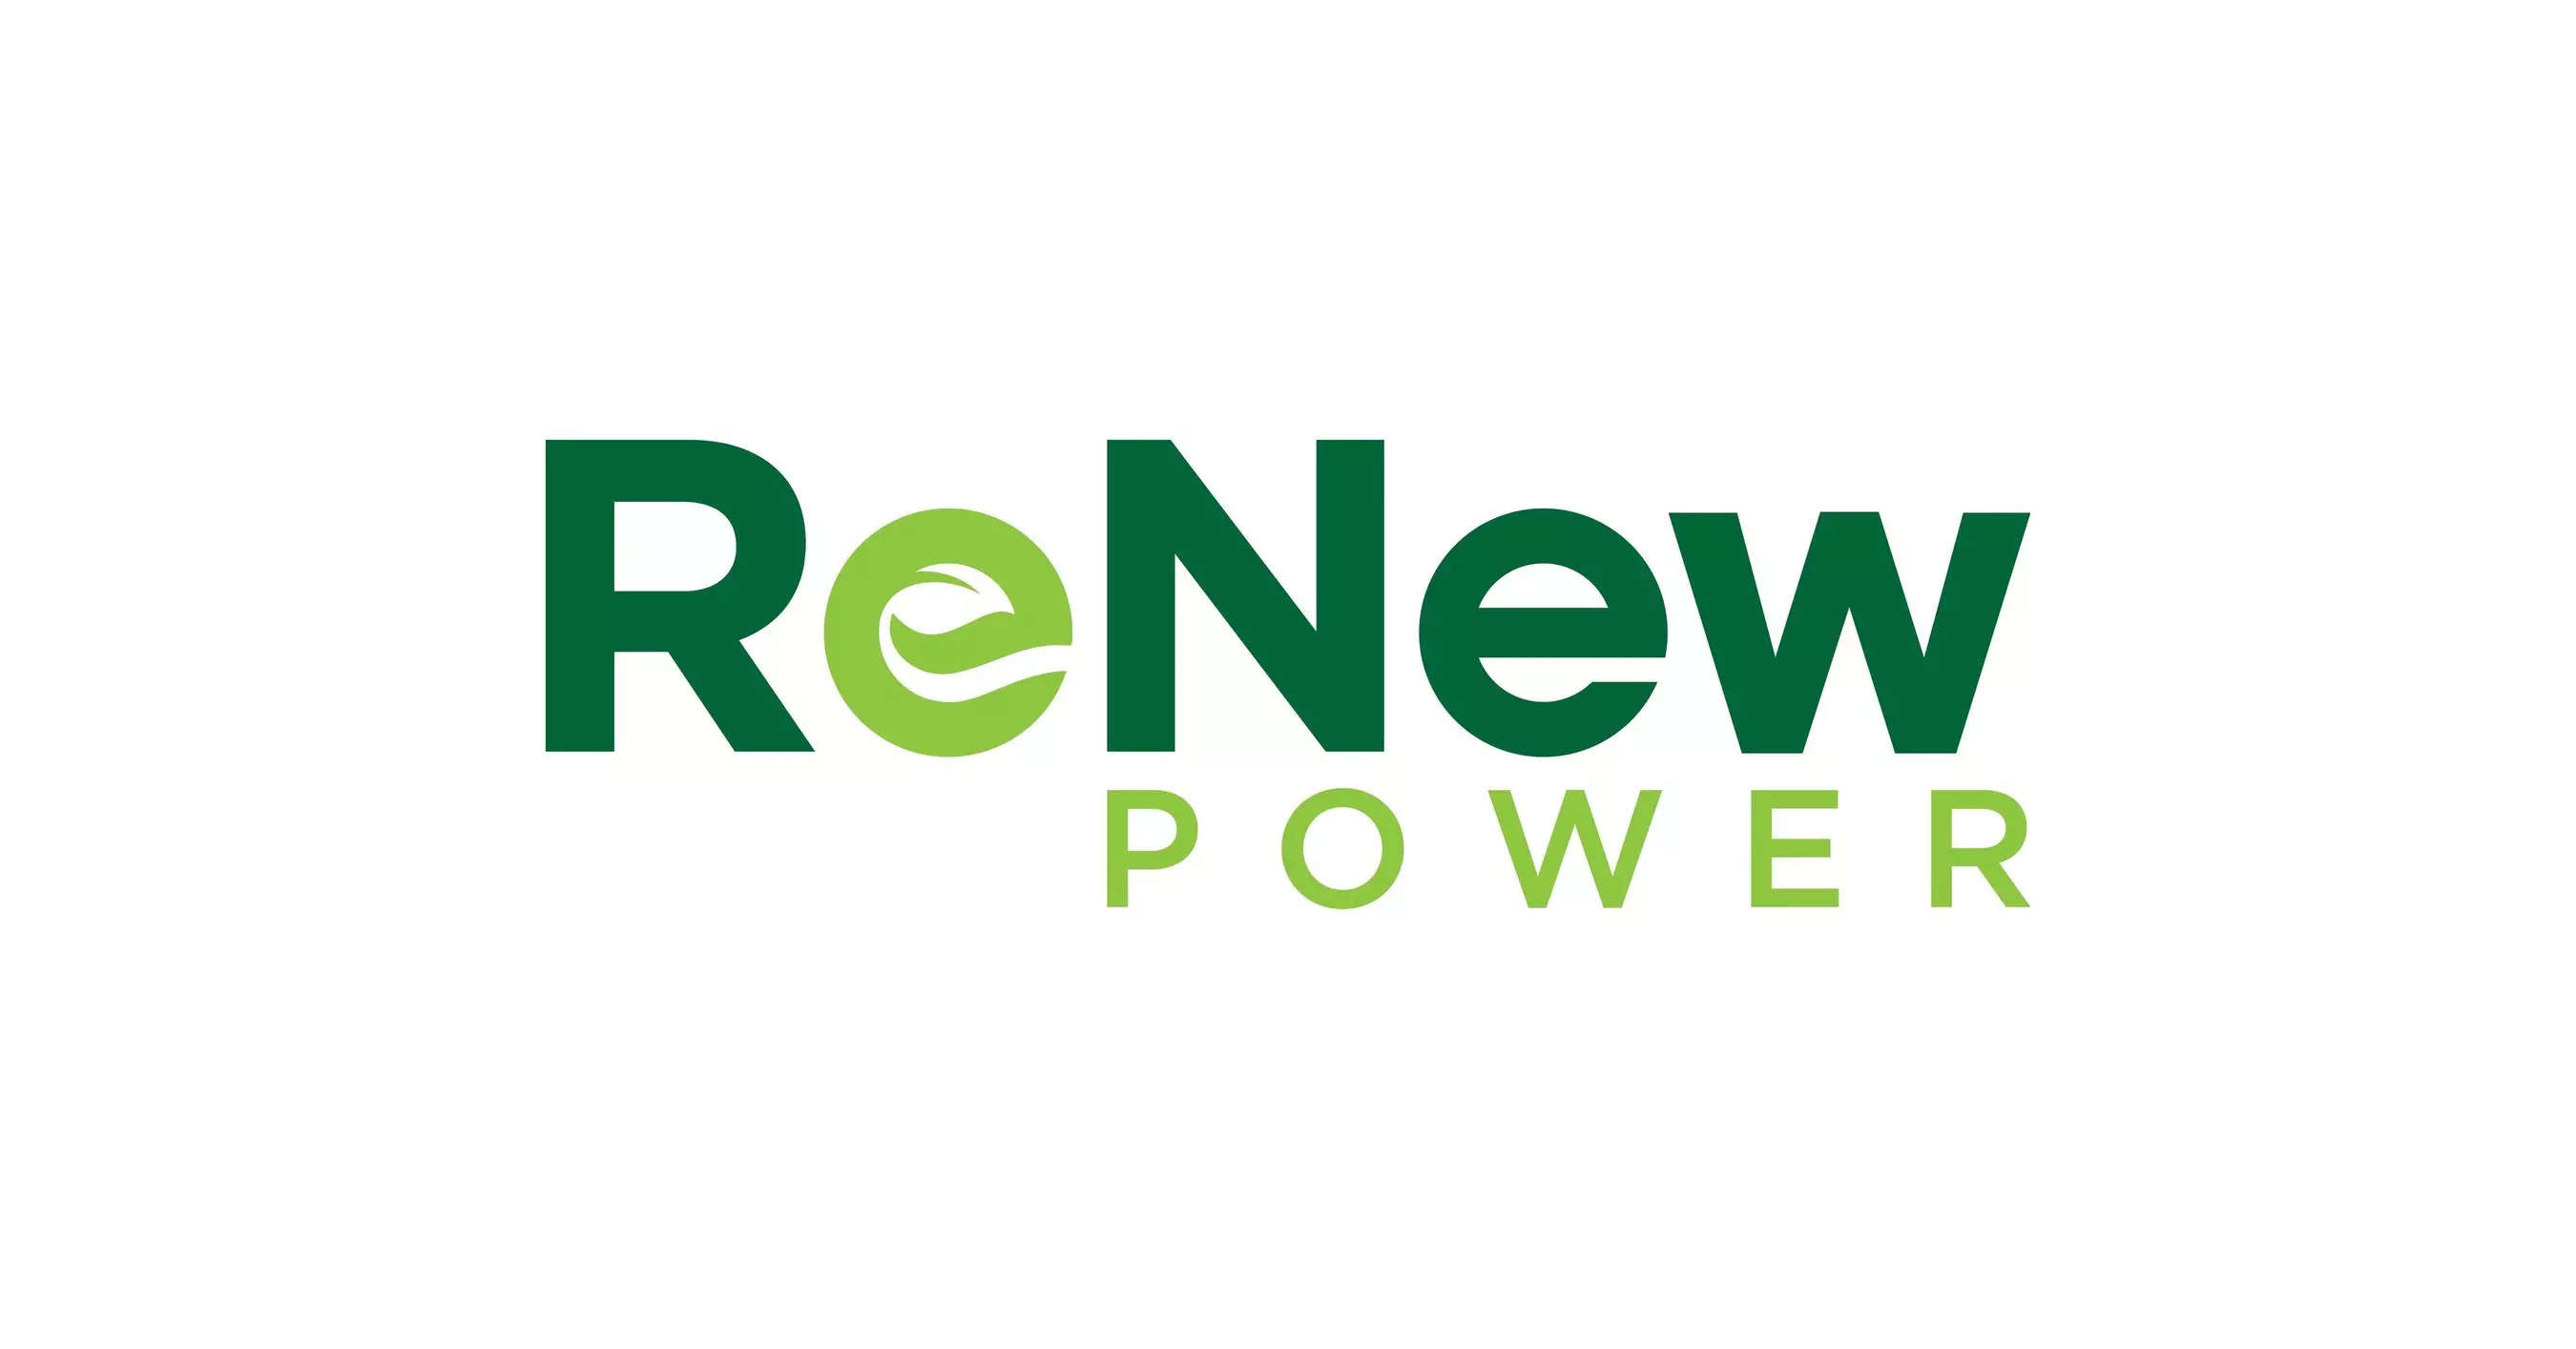 ReNew Power moots INR 50,000 crore investment in renewables, battery, green hydrogen units in Karnataka